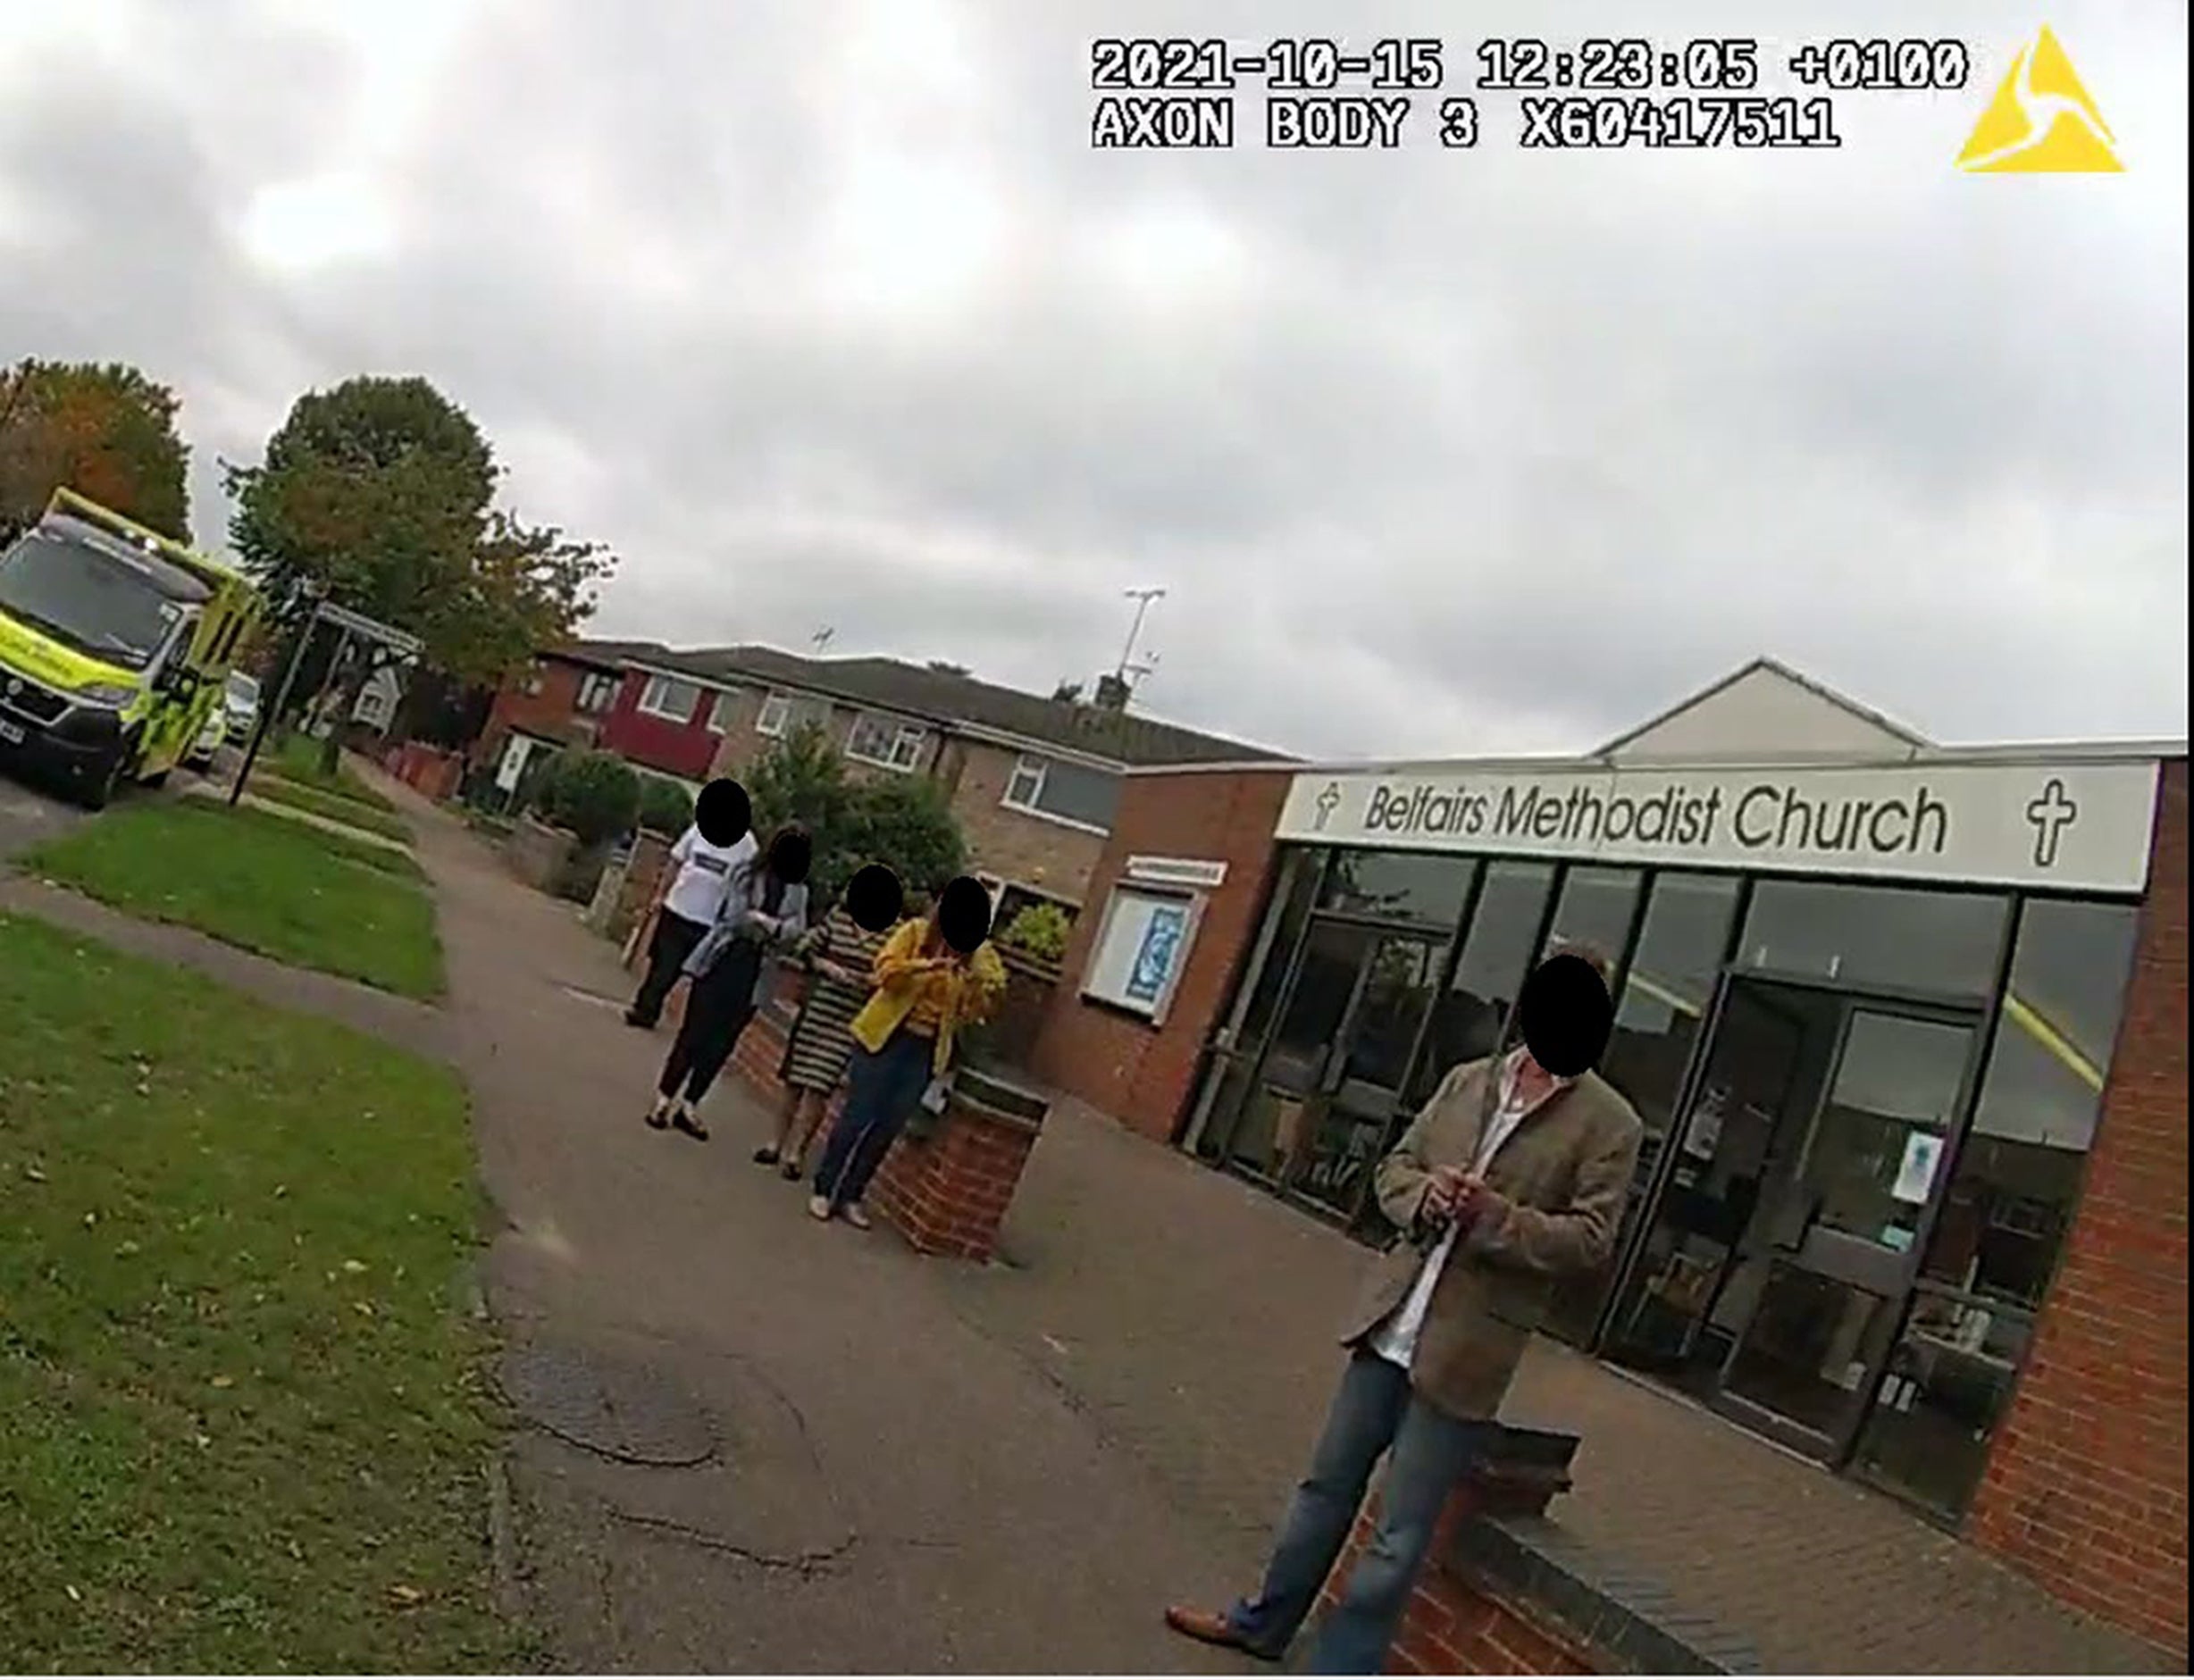 Bodycam footage at Betfairs Methodist Church in the aftermath of Sir David Amess being stabbed to death (Metropolitan Police/PA)